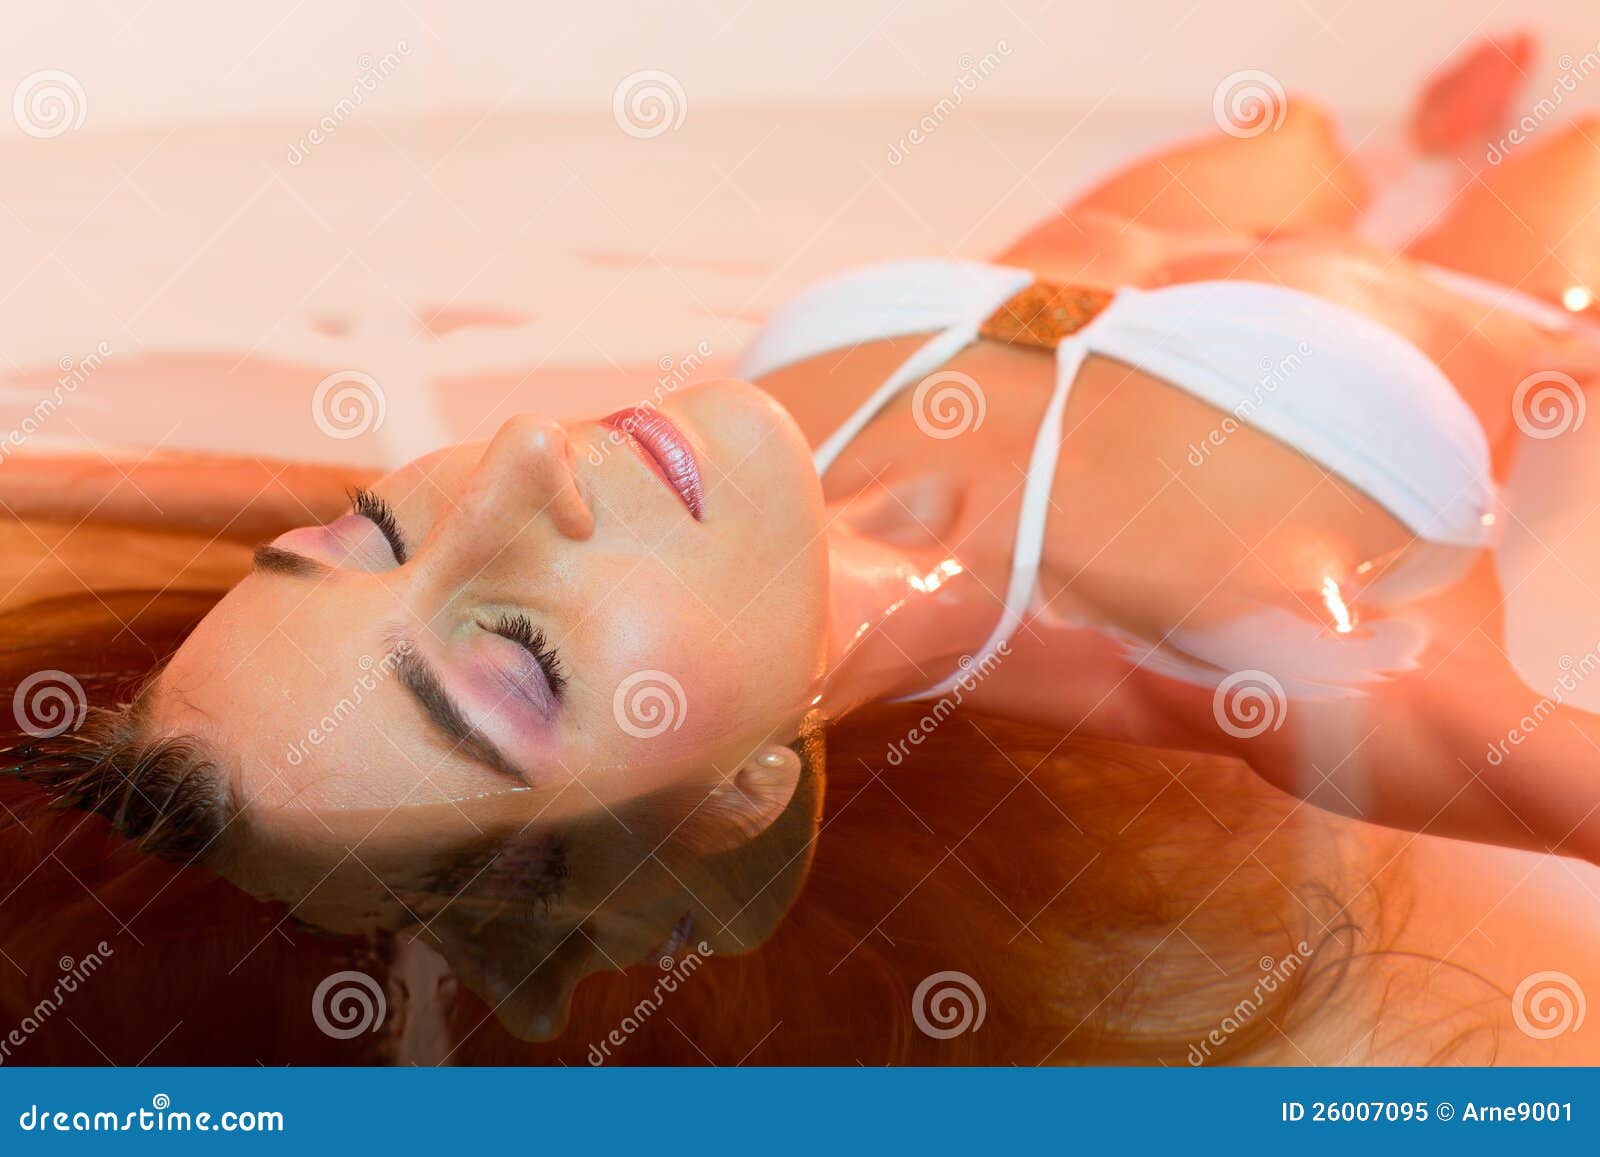 wellness - young woman floating in spa